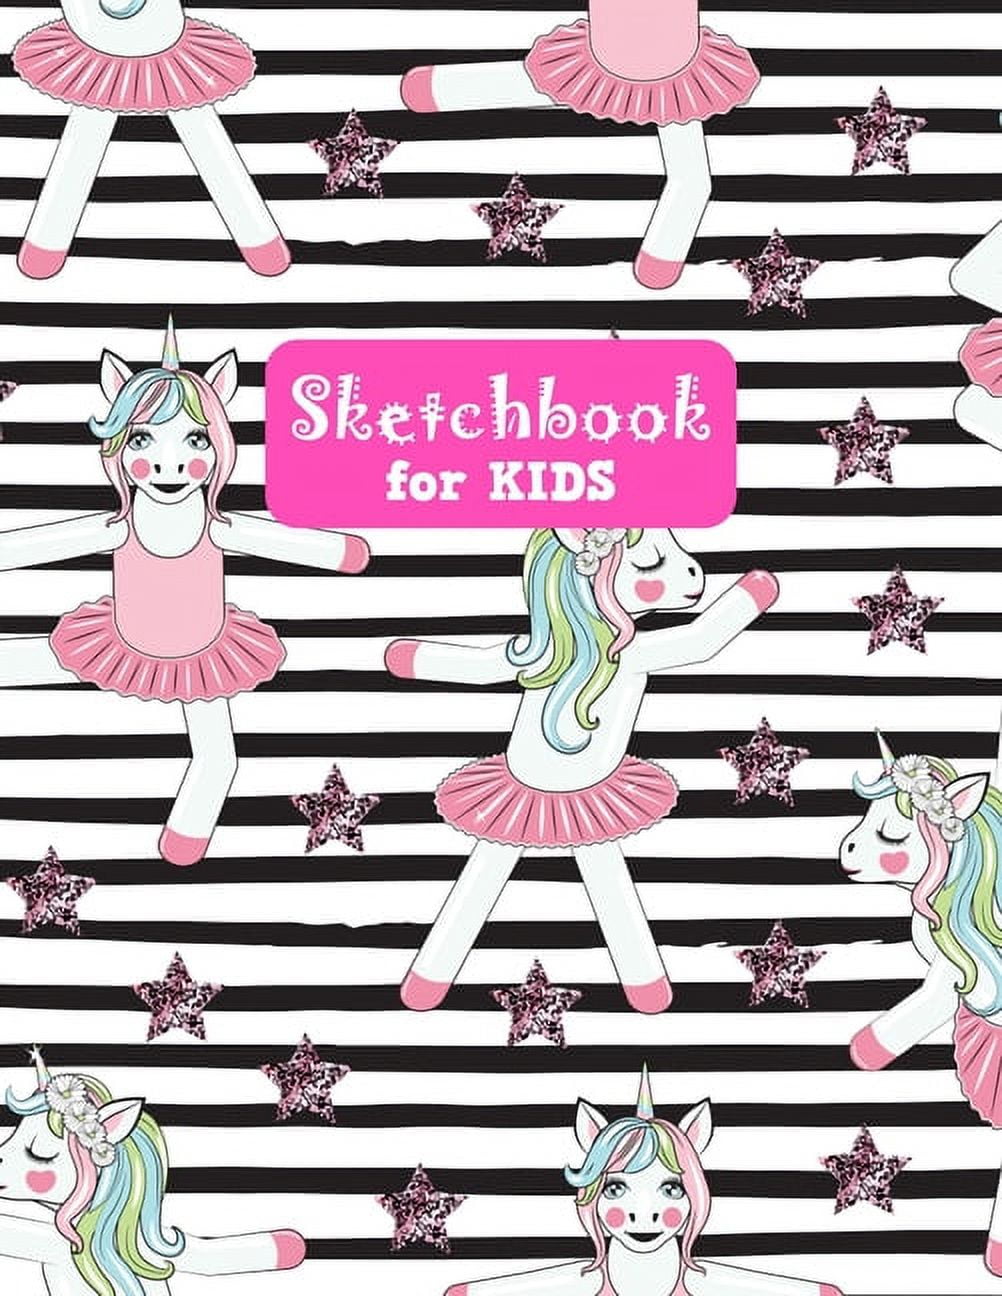 Cute Unicorn Sketchbook for Kids, Unicorn Large Sketchbook for Girls, Blank  Sheet Drawing Book With 120 Pages, 8.5x 11 